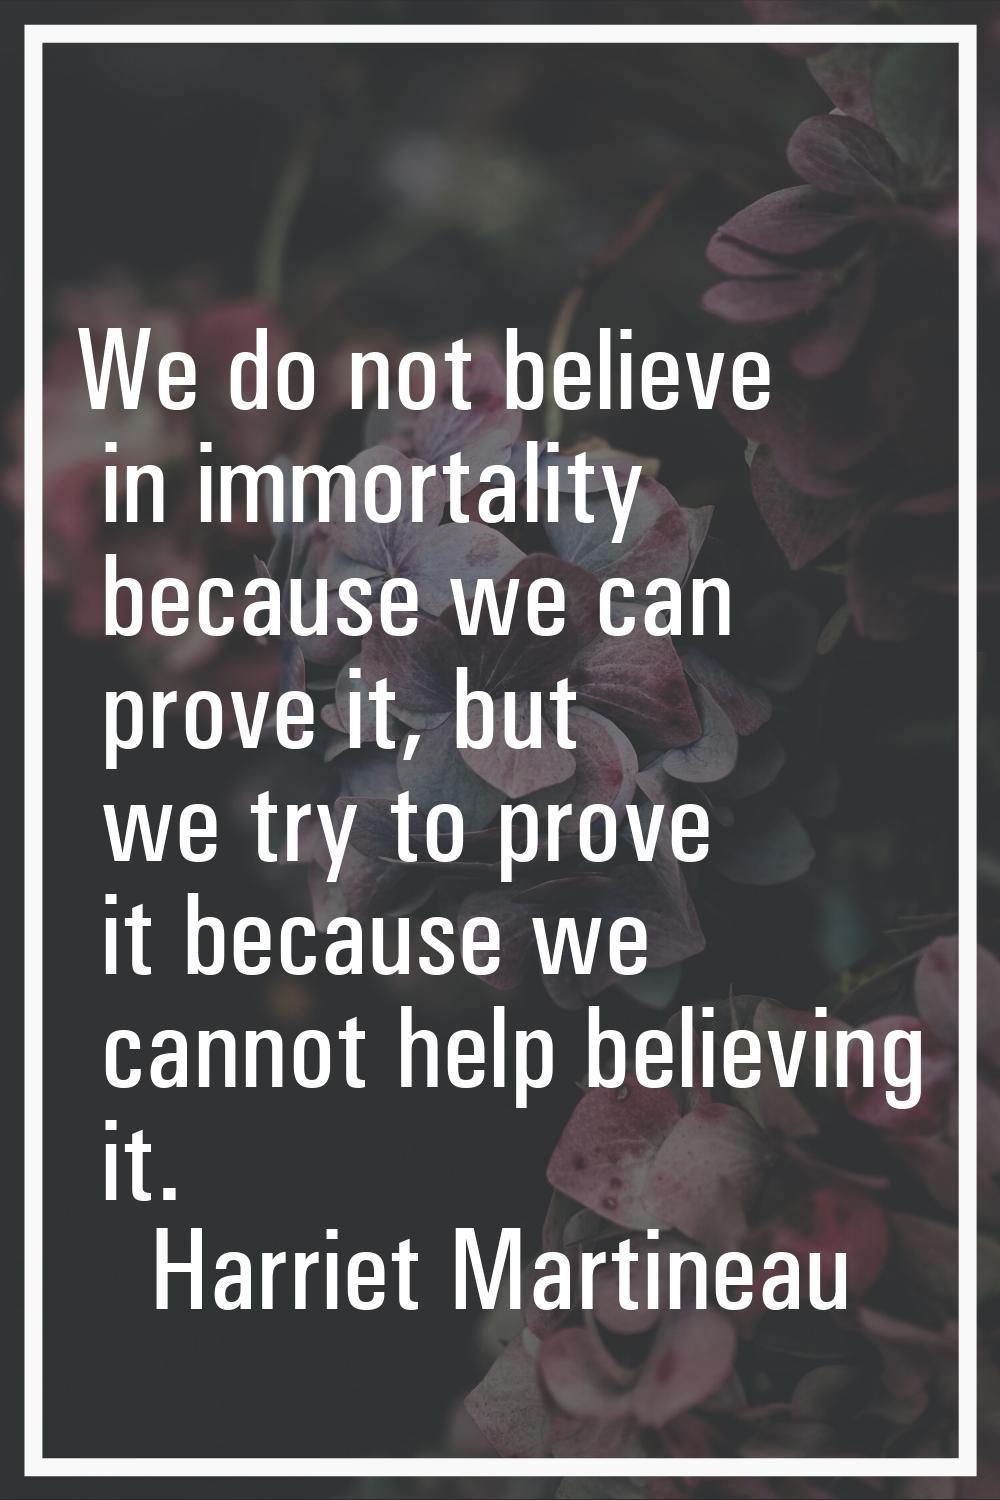 We do not believe in immortality because we can prove it, but we try to prove it because we cannot 